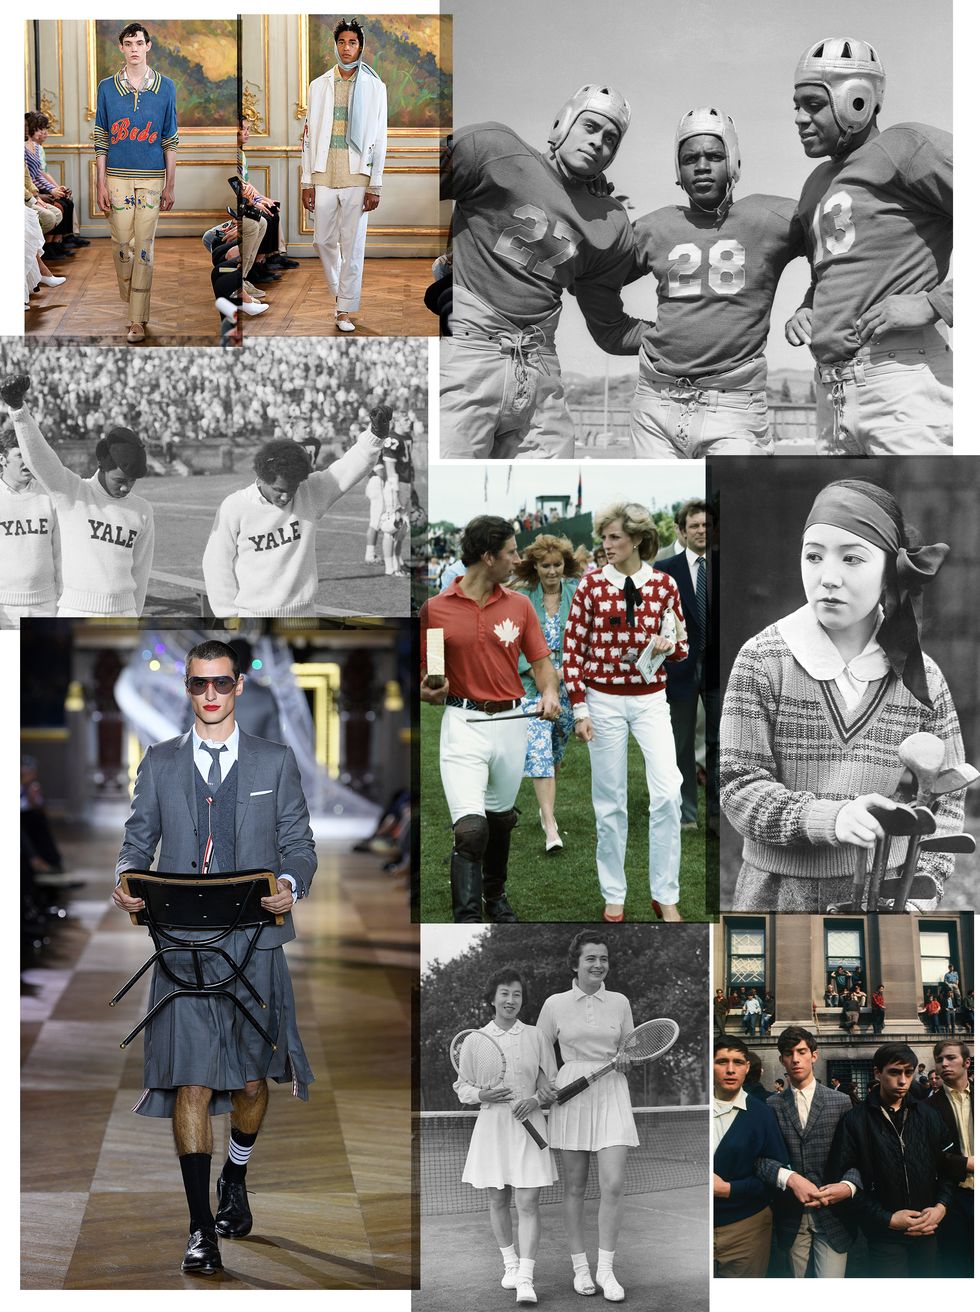 A Fabulous Podcast That Breaks Down the History of Preppy Style